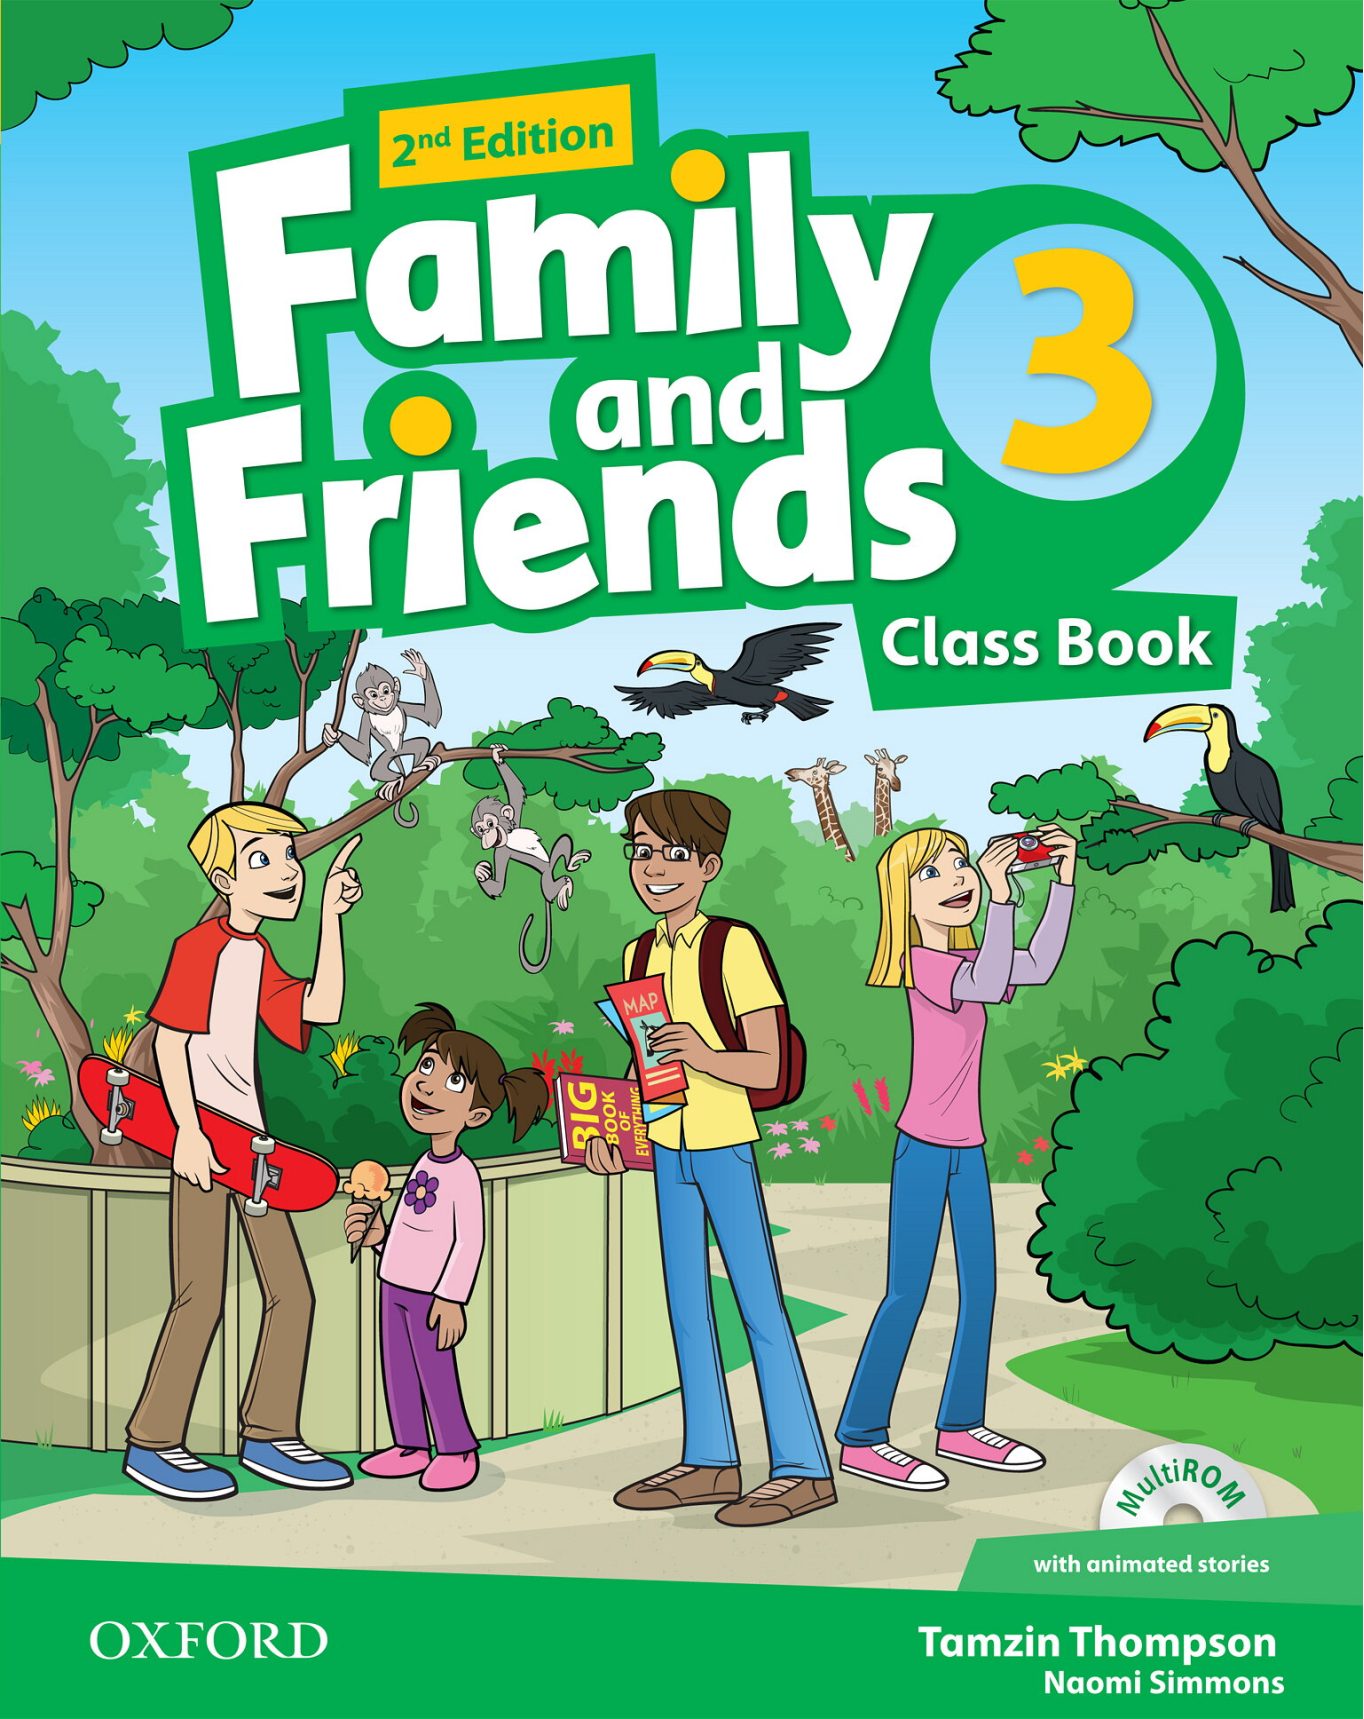 Rich Results on Google's SERP when searching for 'Family And Friends Class Book 3'